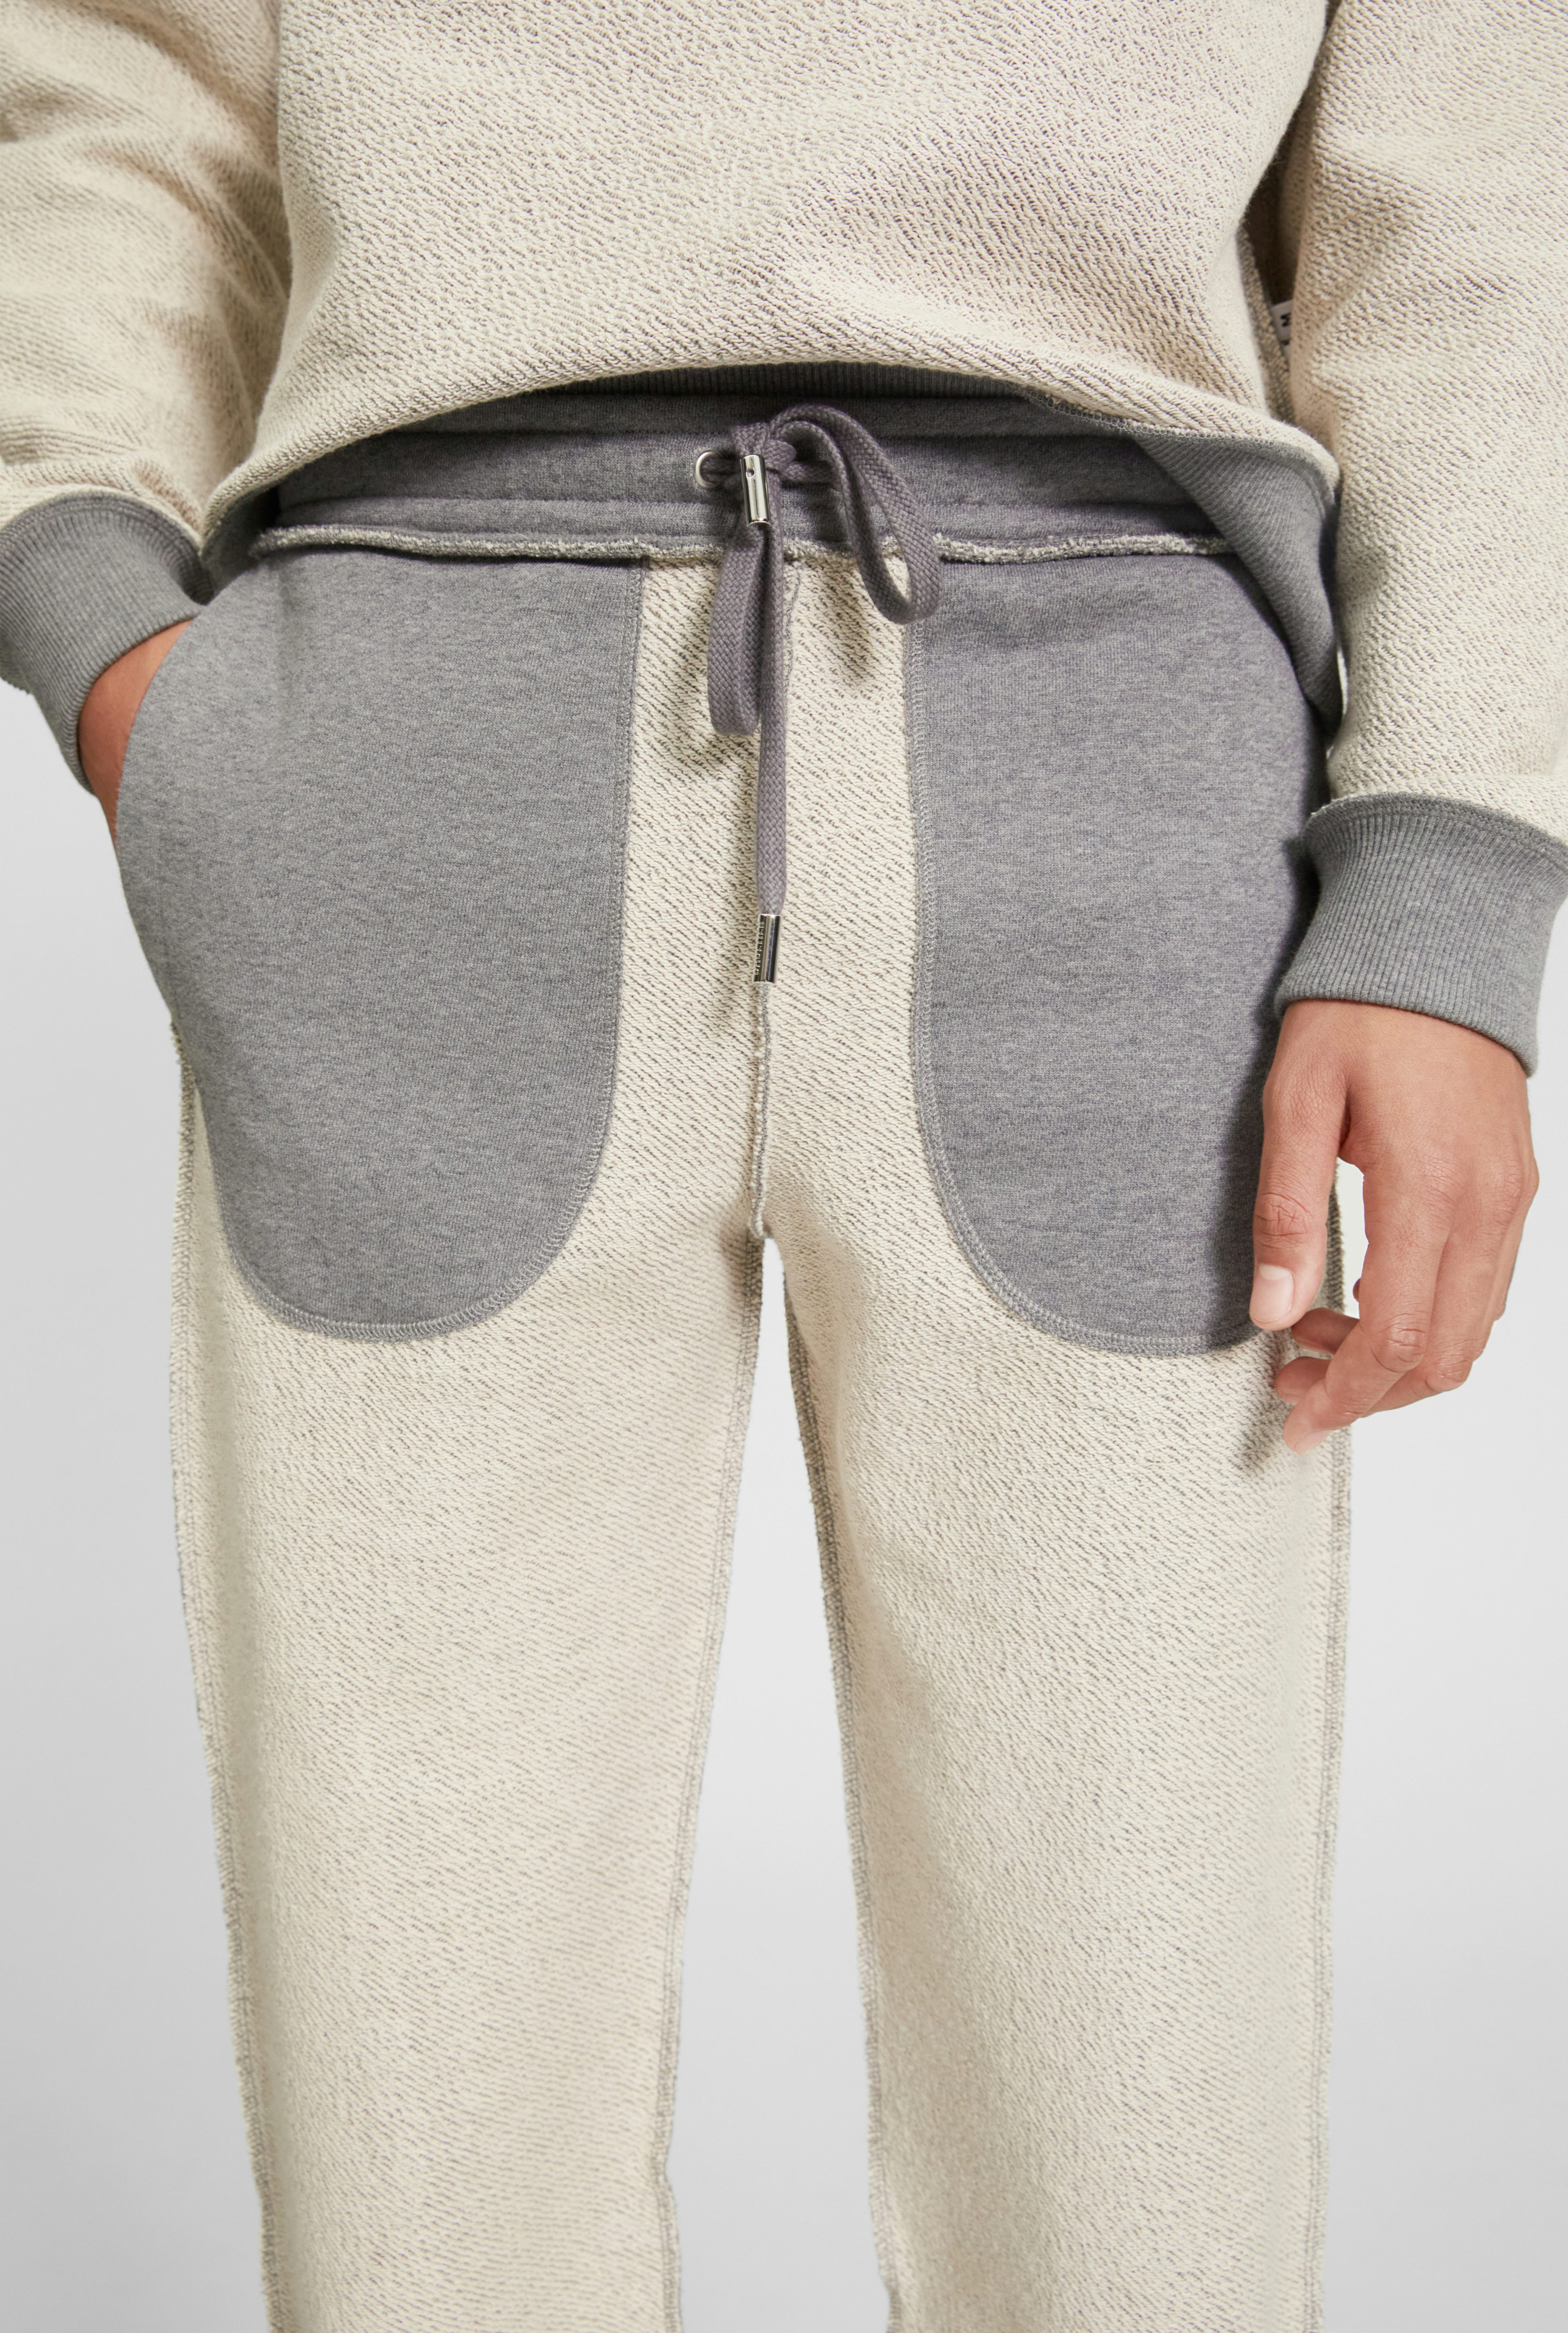 The Inside-Out tracksuit pants